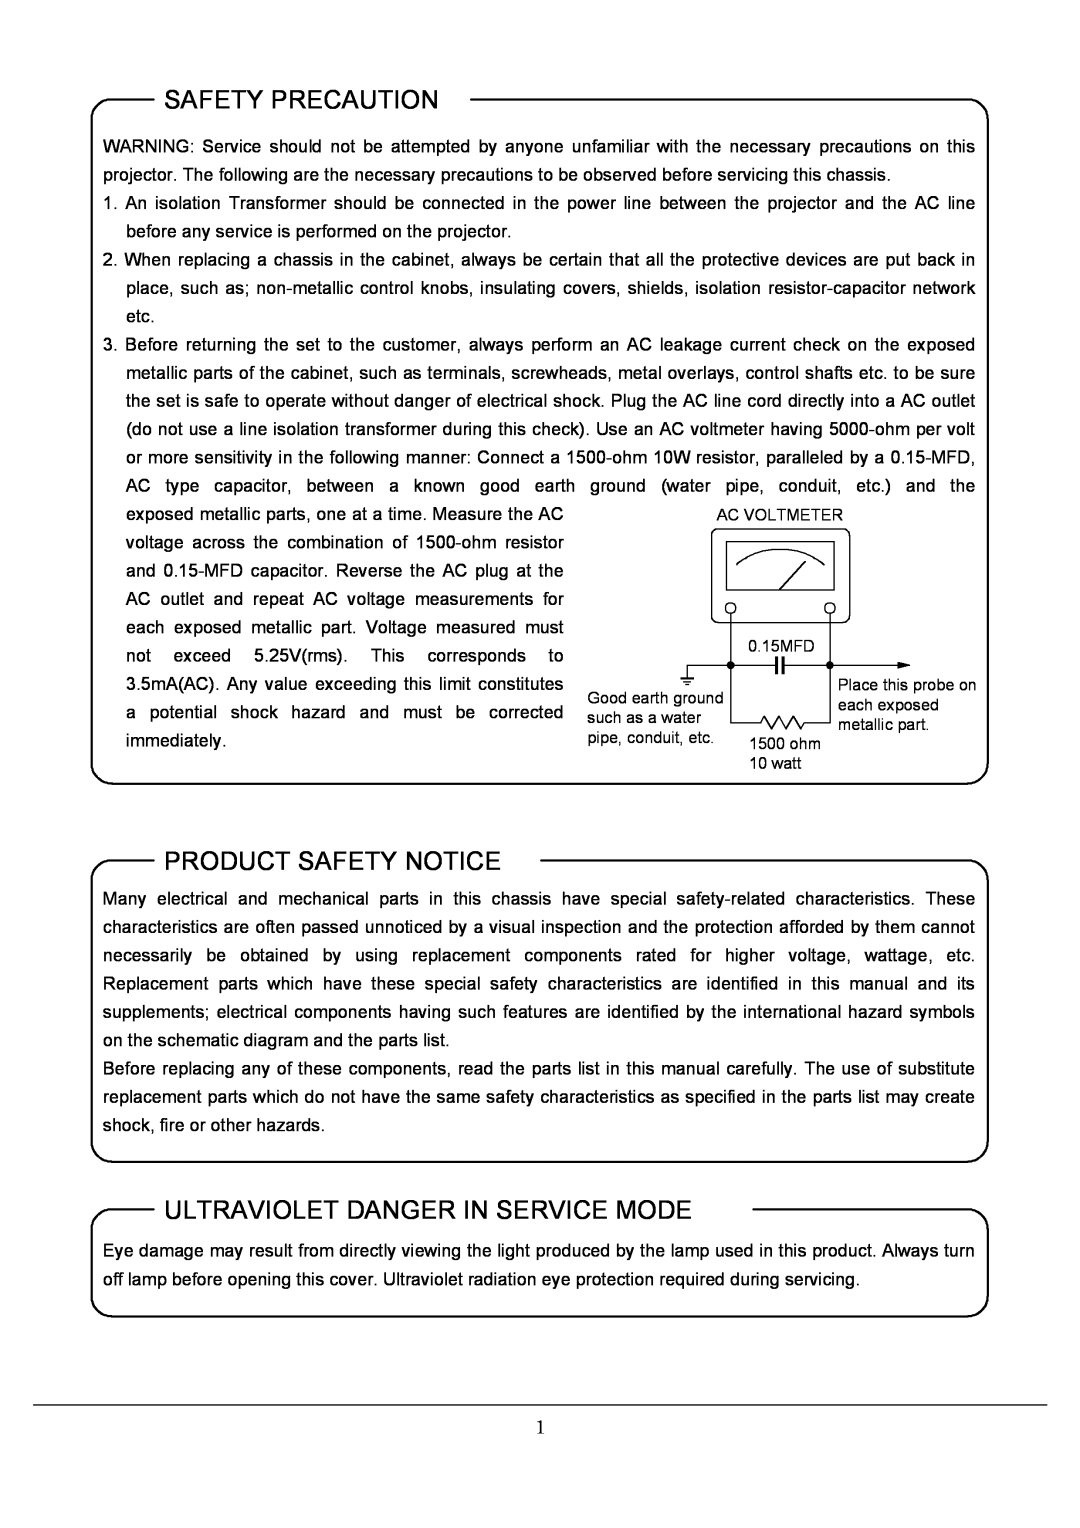 Toshiba P600DL service manual Safety Precaution, Product Safety Notice, Ultraviolet Danger In Service Mode 